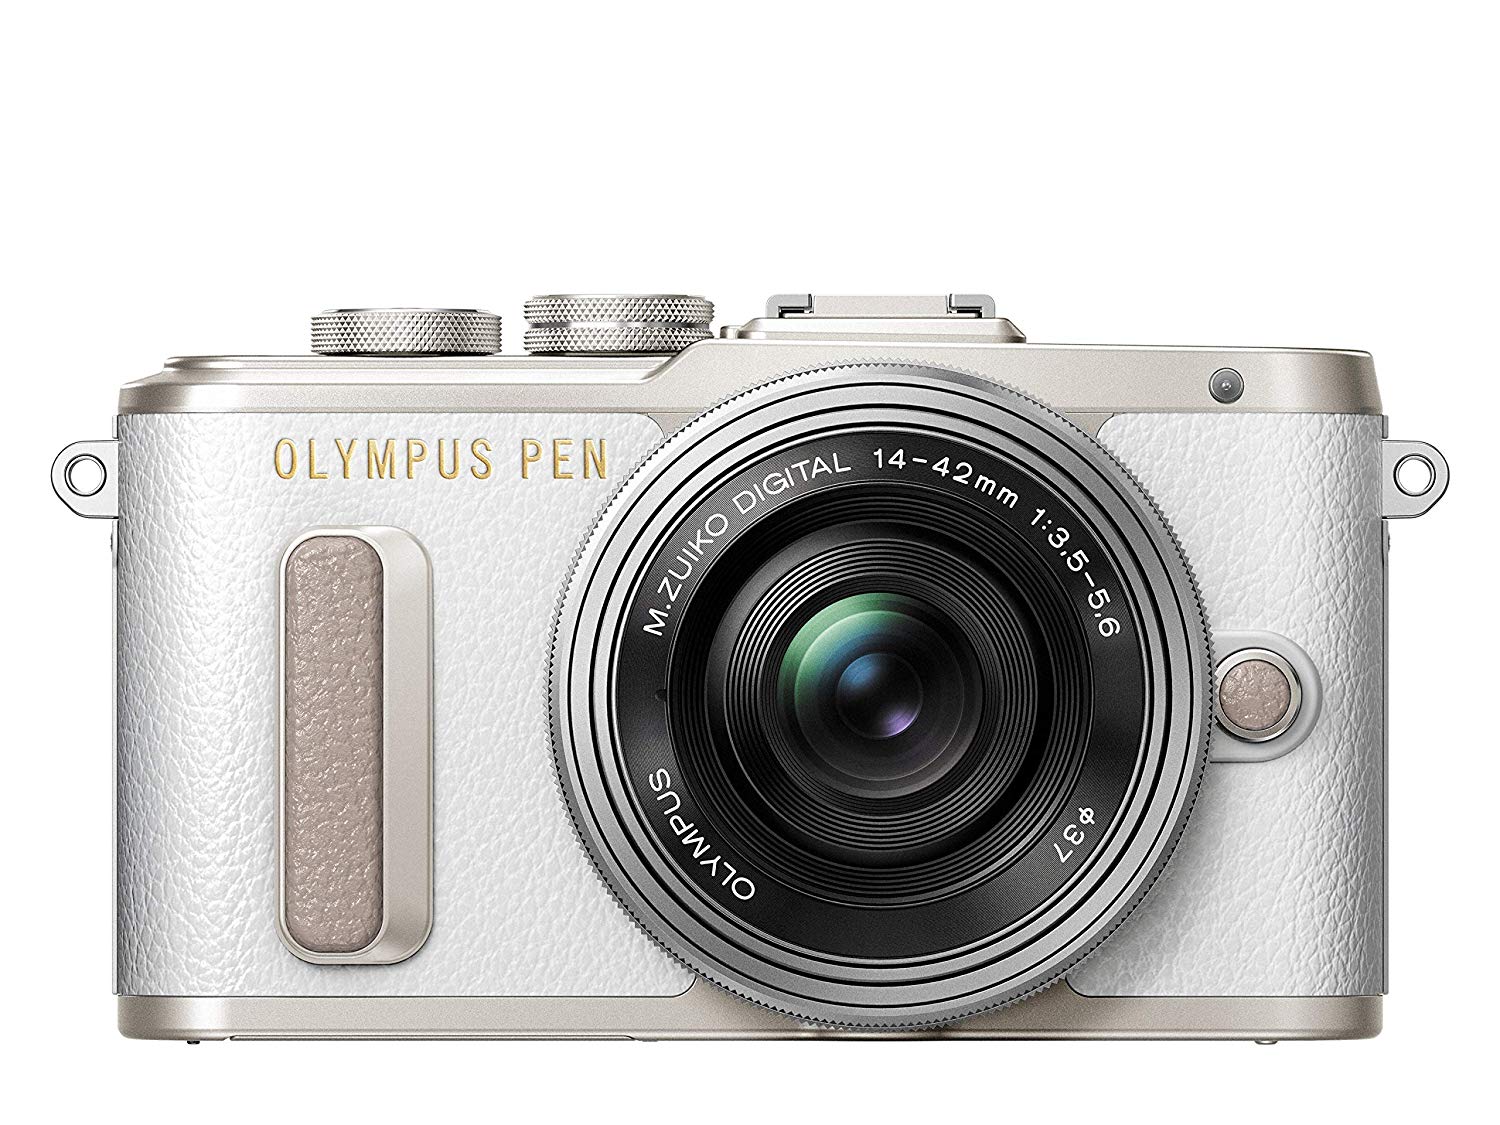 Olympus PEN E-PL8 Mirrorless Micro Four Thirds Digital Camera with 14-42mm Prime Lens Kit